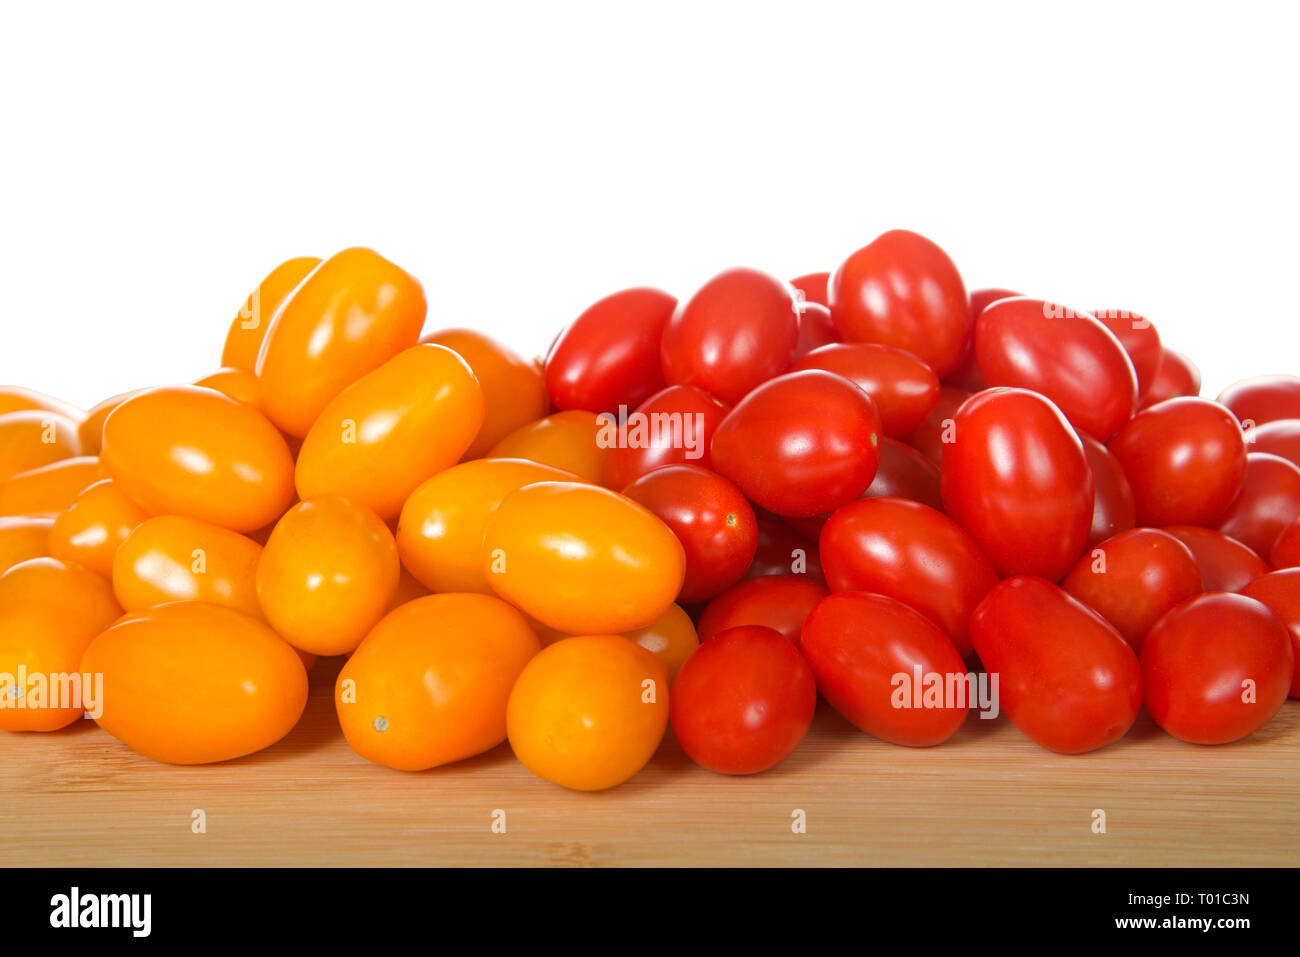 Zima, an orange grape tomatoes next to Angel Sweet grape Tomatoes. Both great for salads or snacking. Stock Photo